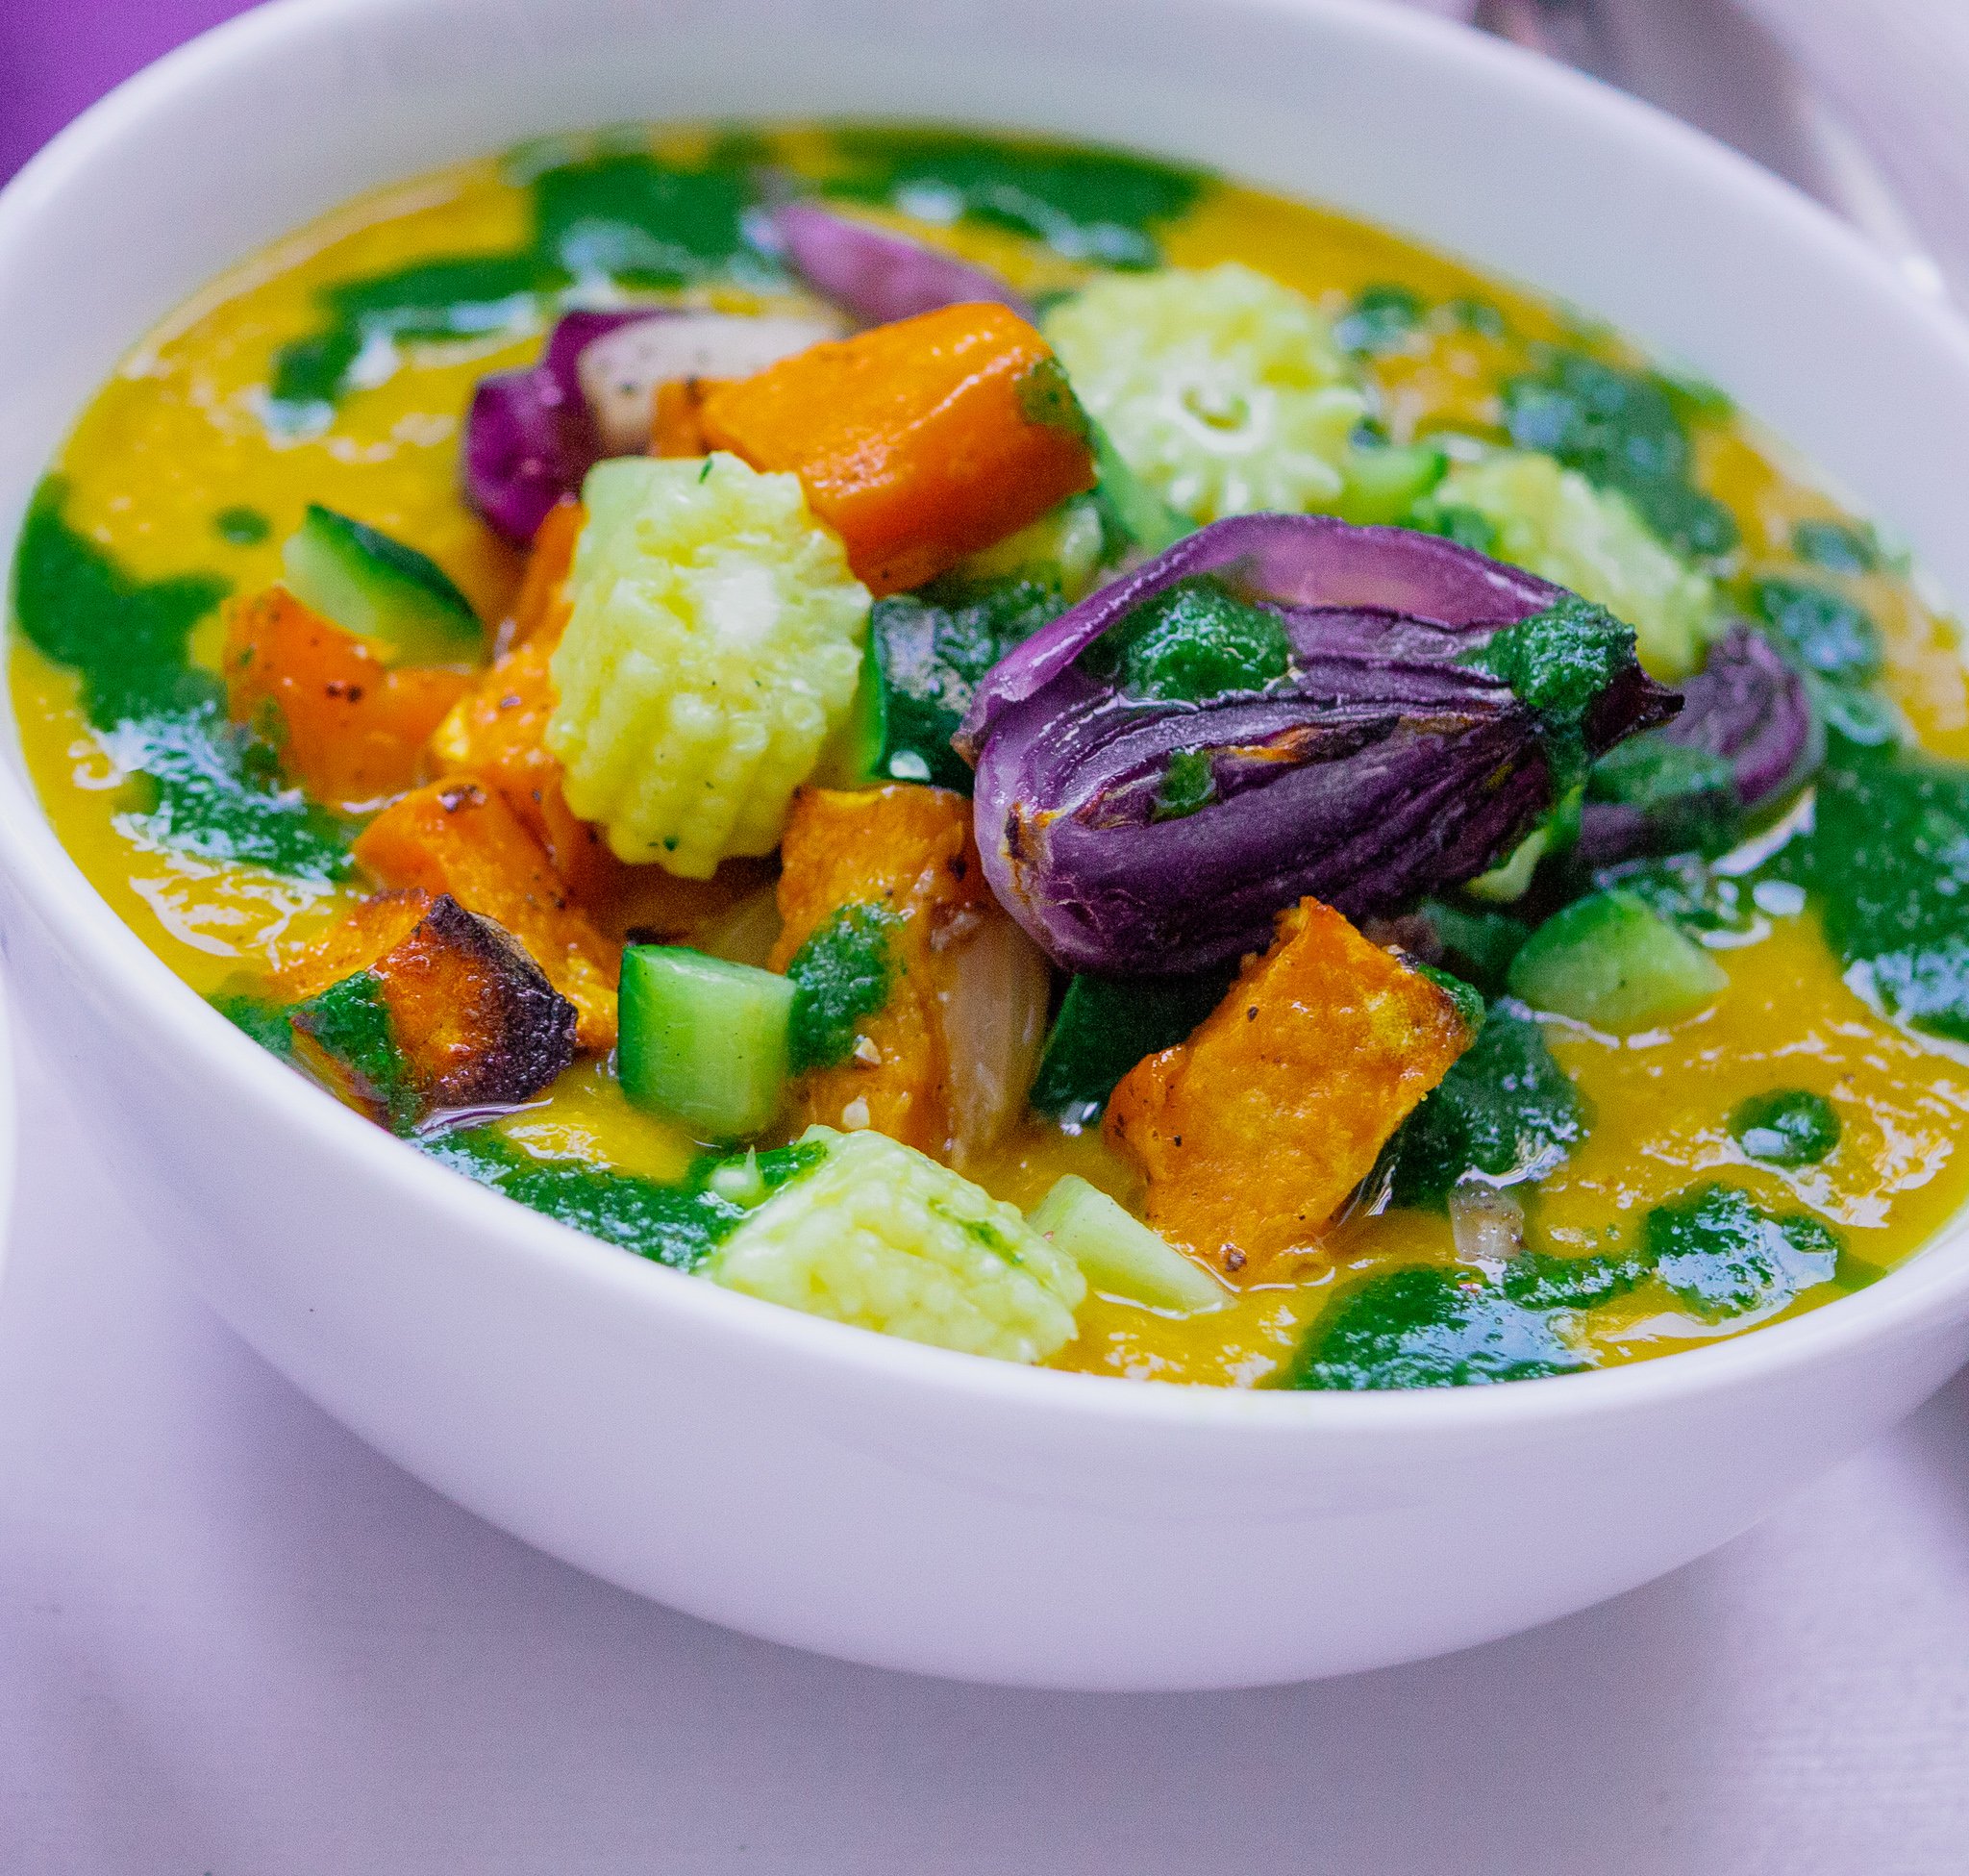 gluten and dairy free soup recipe by kam sokhi allergy chef